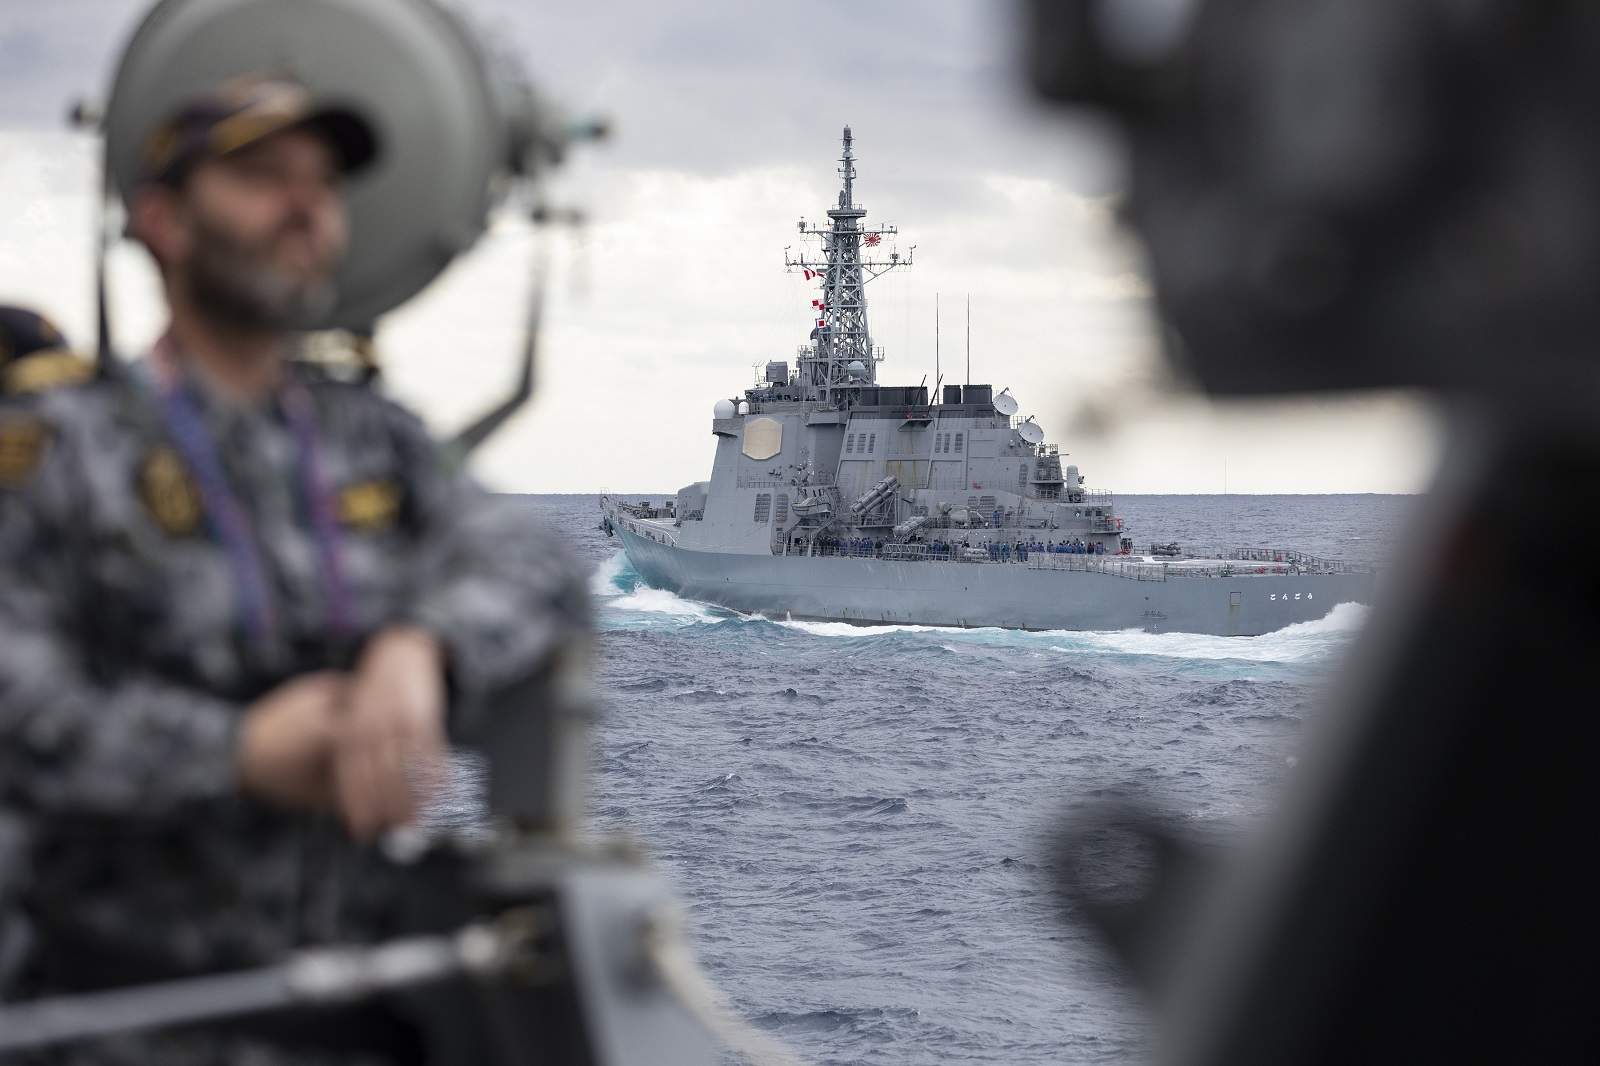 Onboard HMAS Brisbane during ANNUALEX 2021 with Japan Maritime Self Defence Force Ship JS Kirishima in the background (Defence.gov.au)